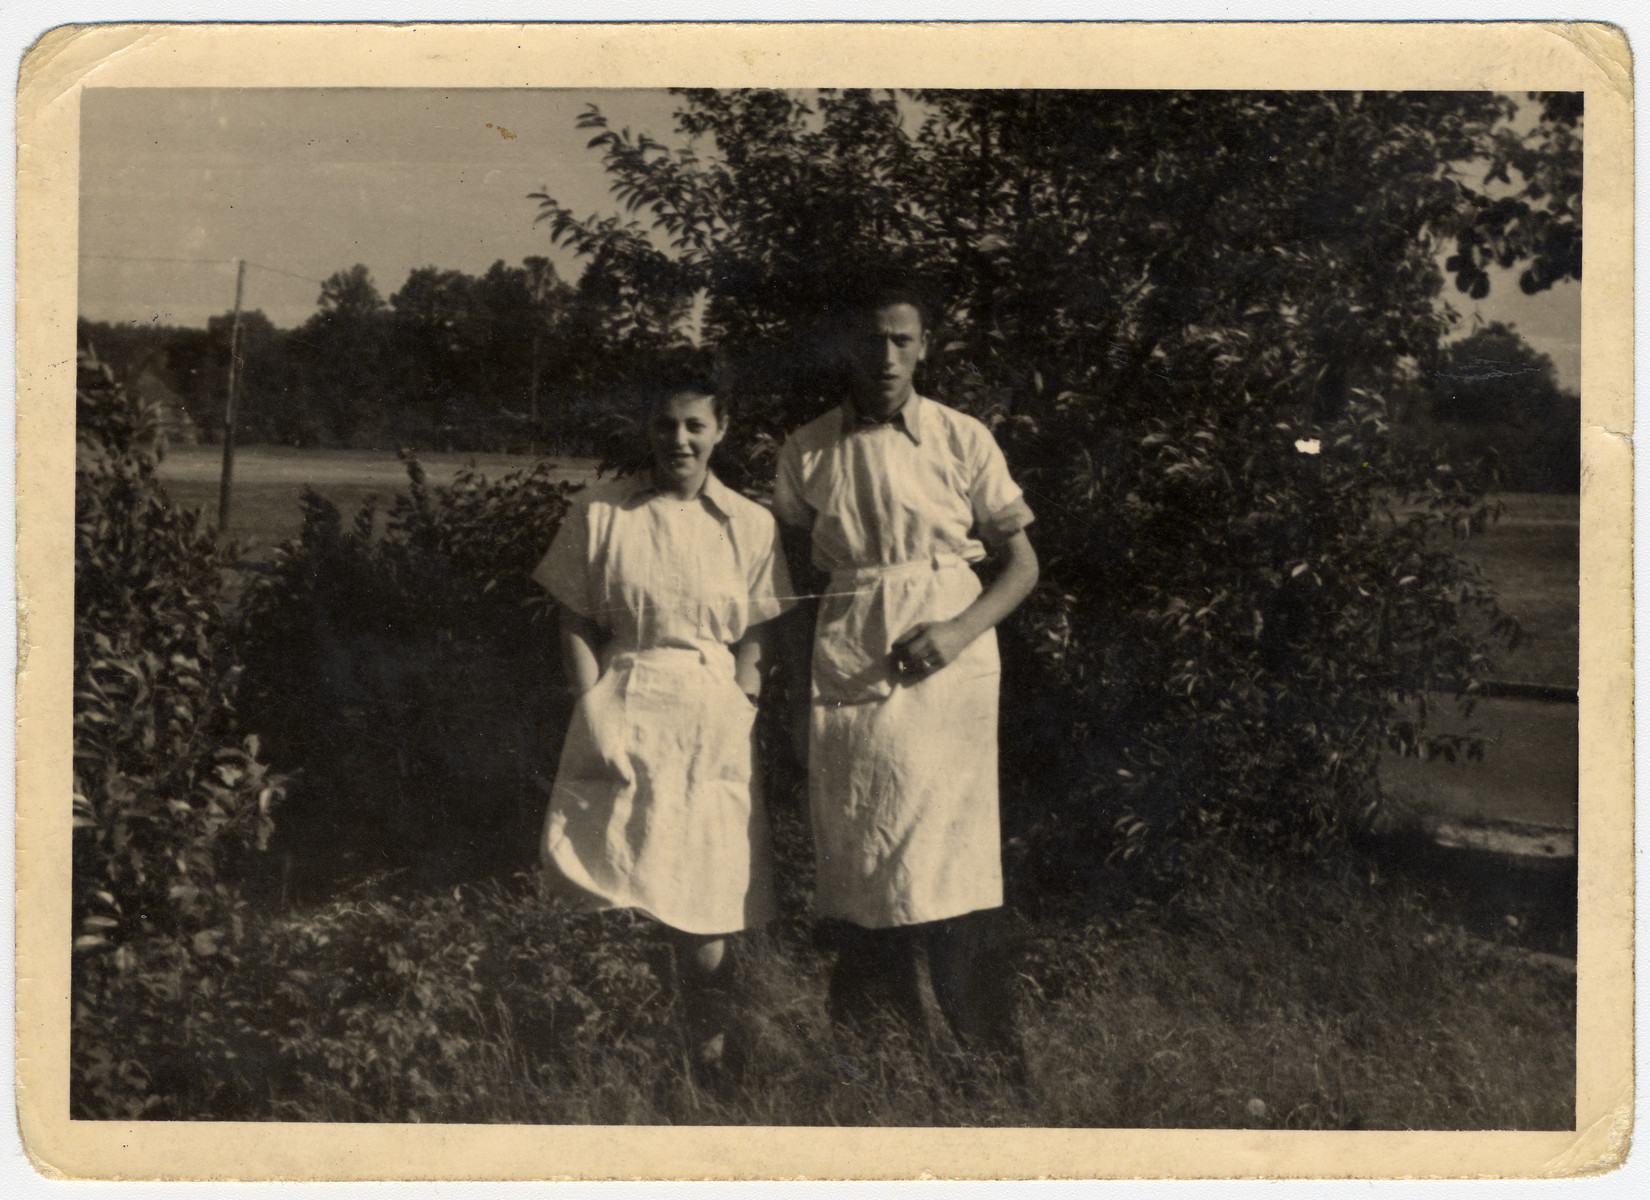 Two dental technician students stand in a garden in the Bergen-Belsen displaced persons camp.

Erno Pollak is on the right.